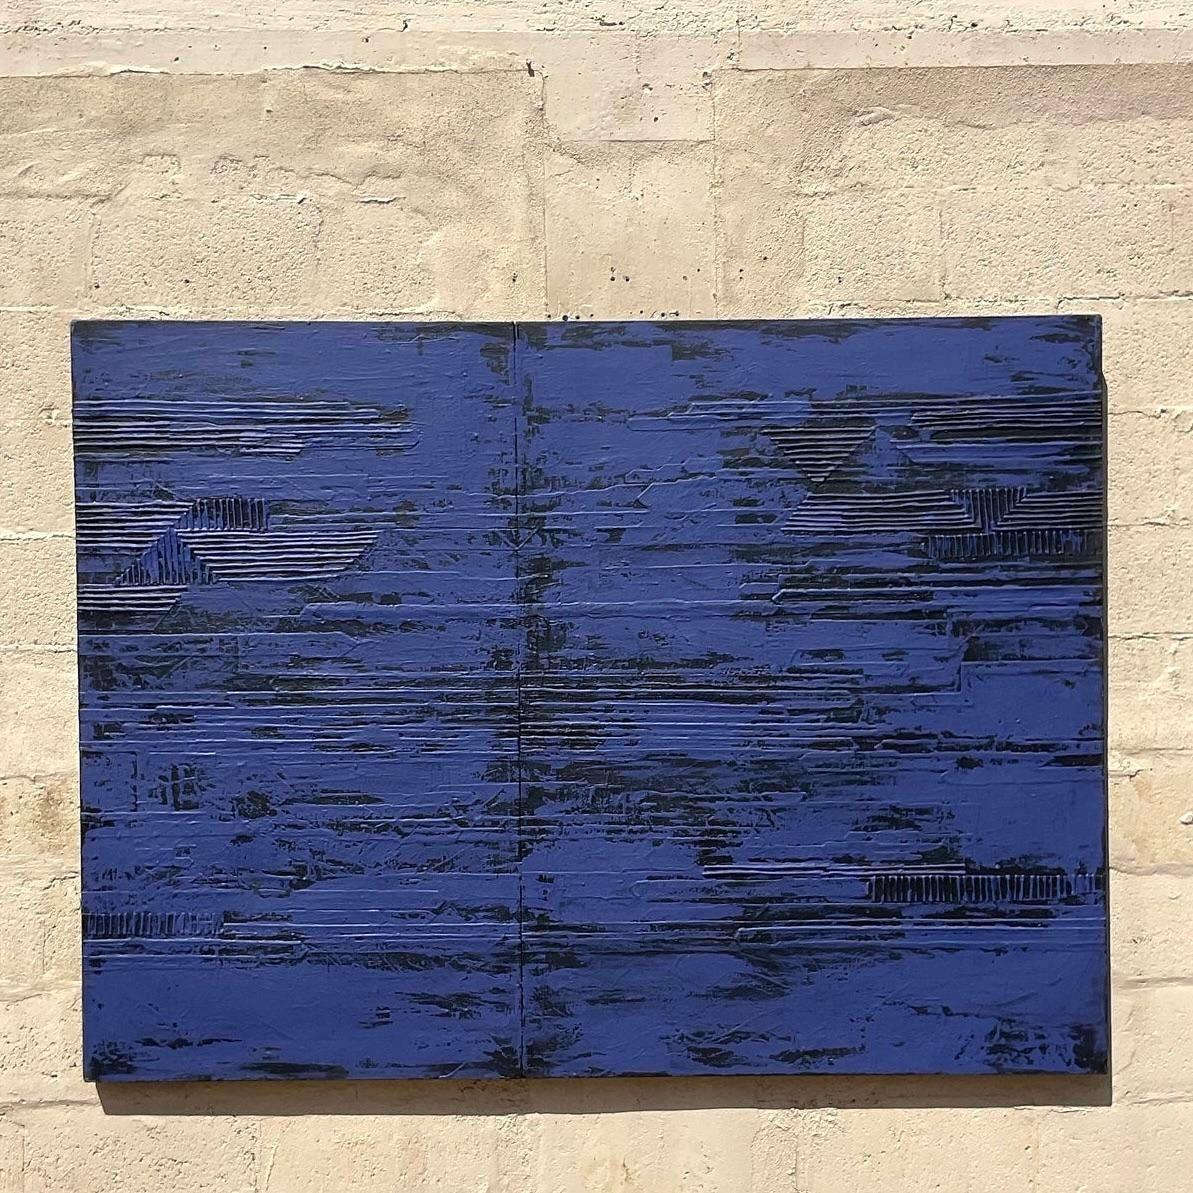 This seemingly minimalistic abstract has hidden details within the dimensions of the piece. The soft navy blue and black make for a subtle addition to a space, but looking closer there are linear textural element hidden on the surface. Acquired from